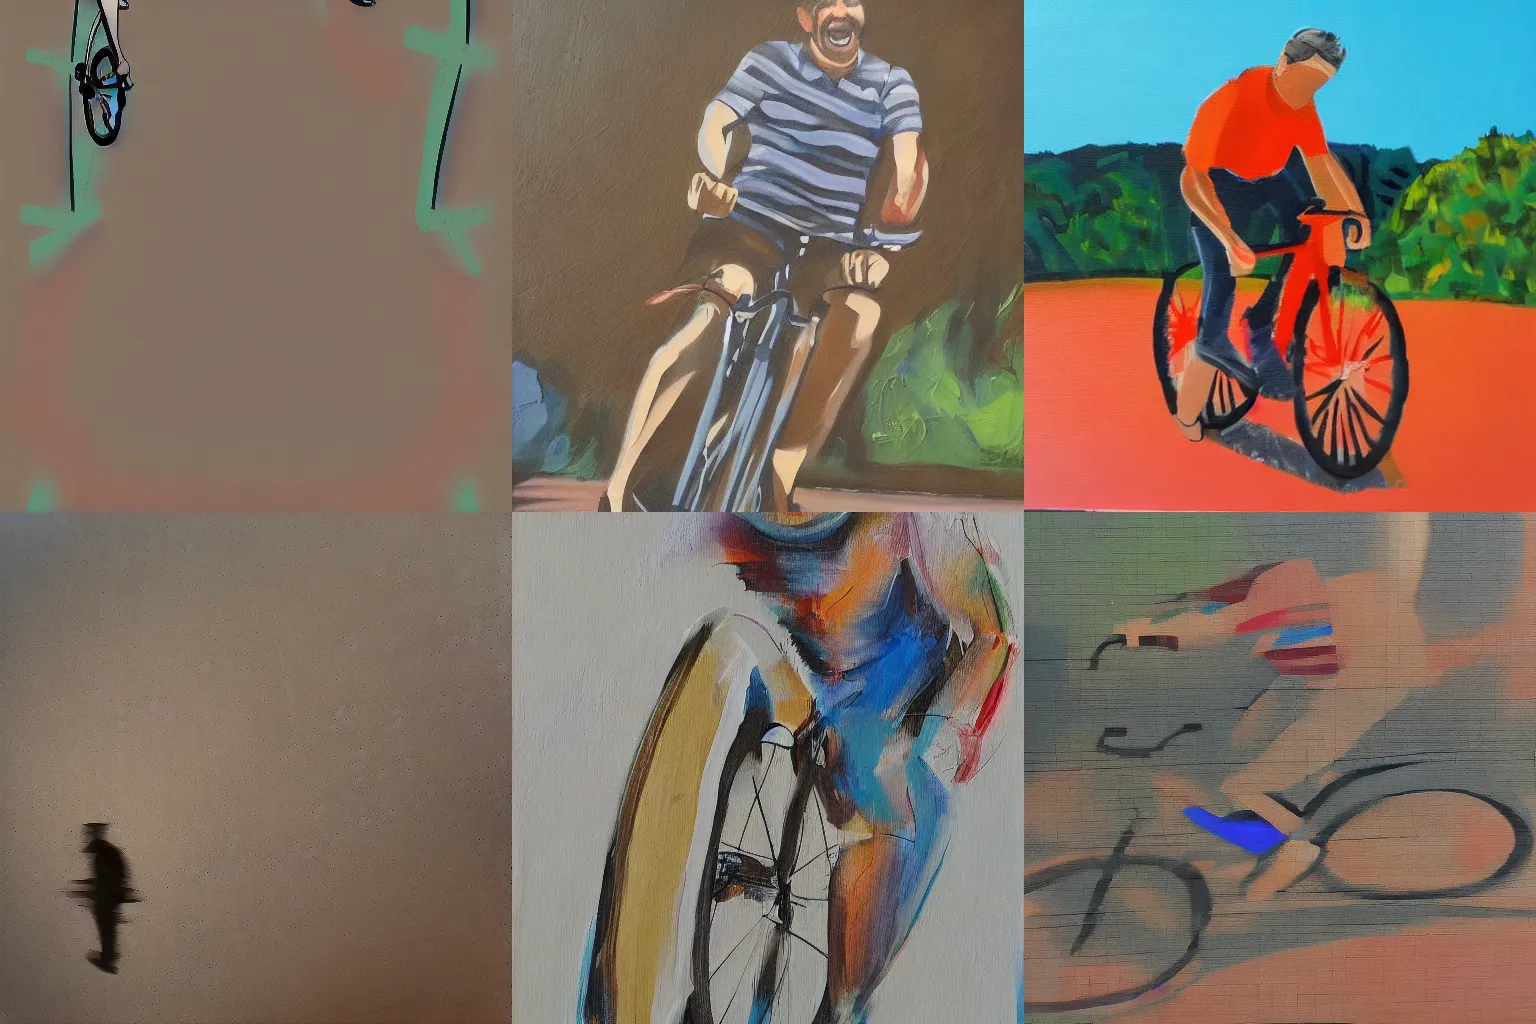 Prompt: A man riding a bicycle action shot, subject is smiling, acrylic painting